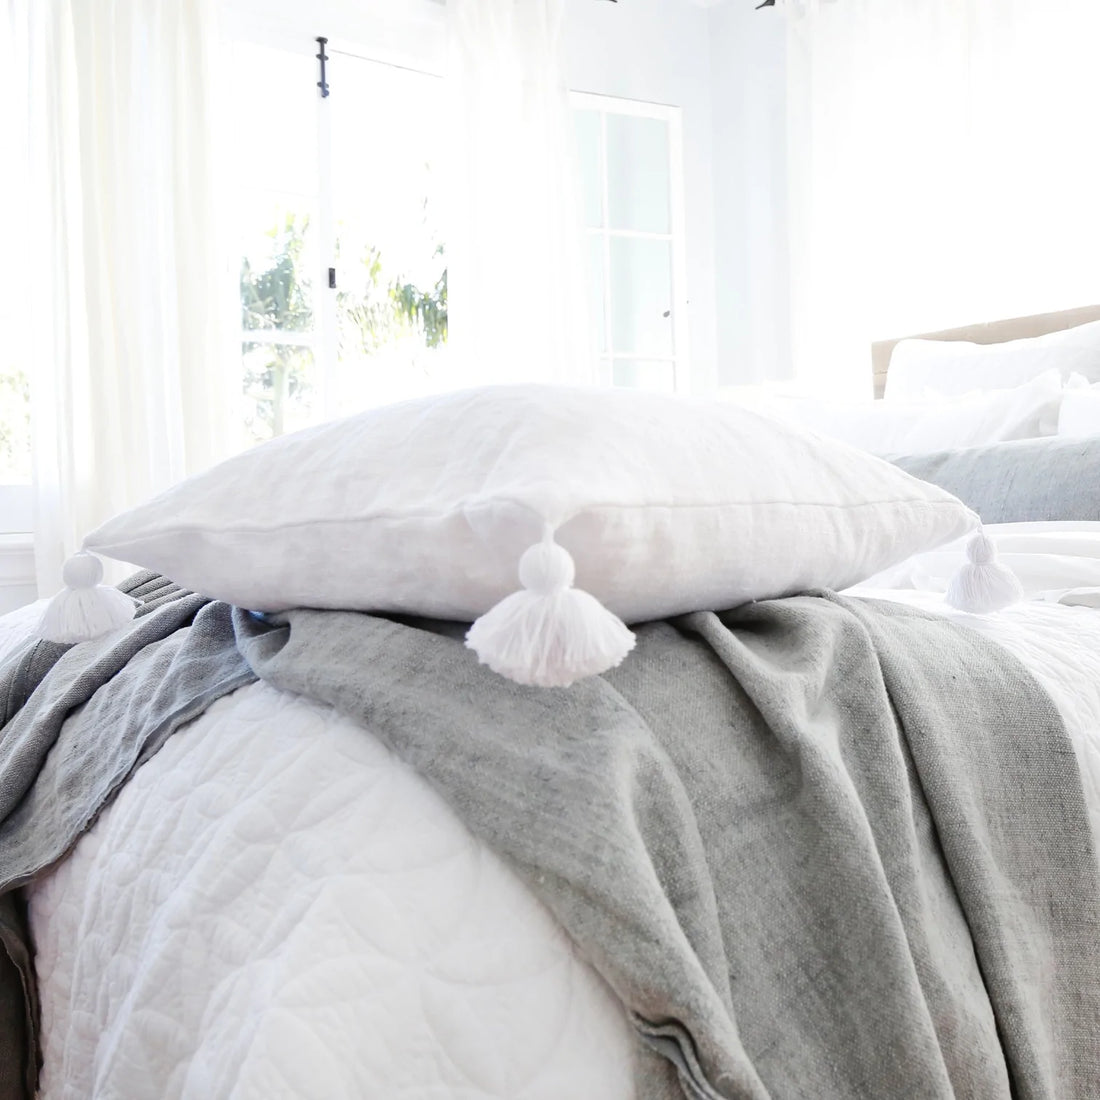 Montauk Square Pillow with Tassels, Pure White